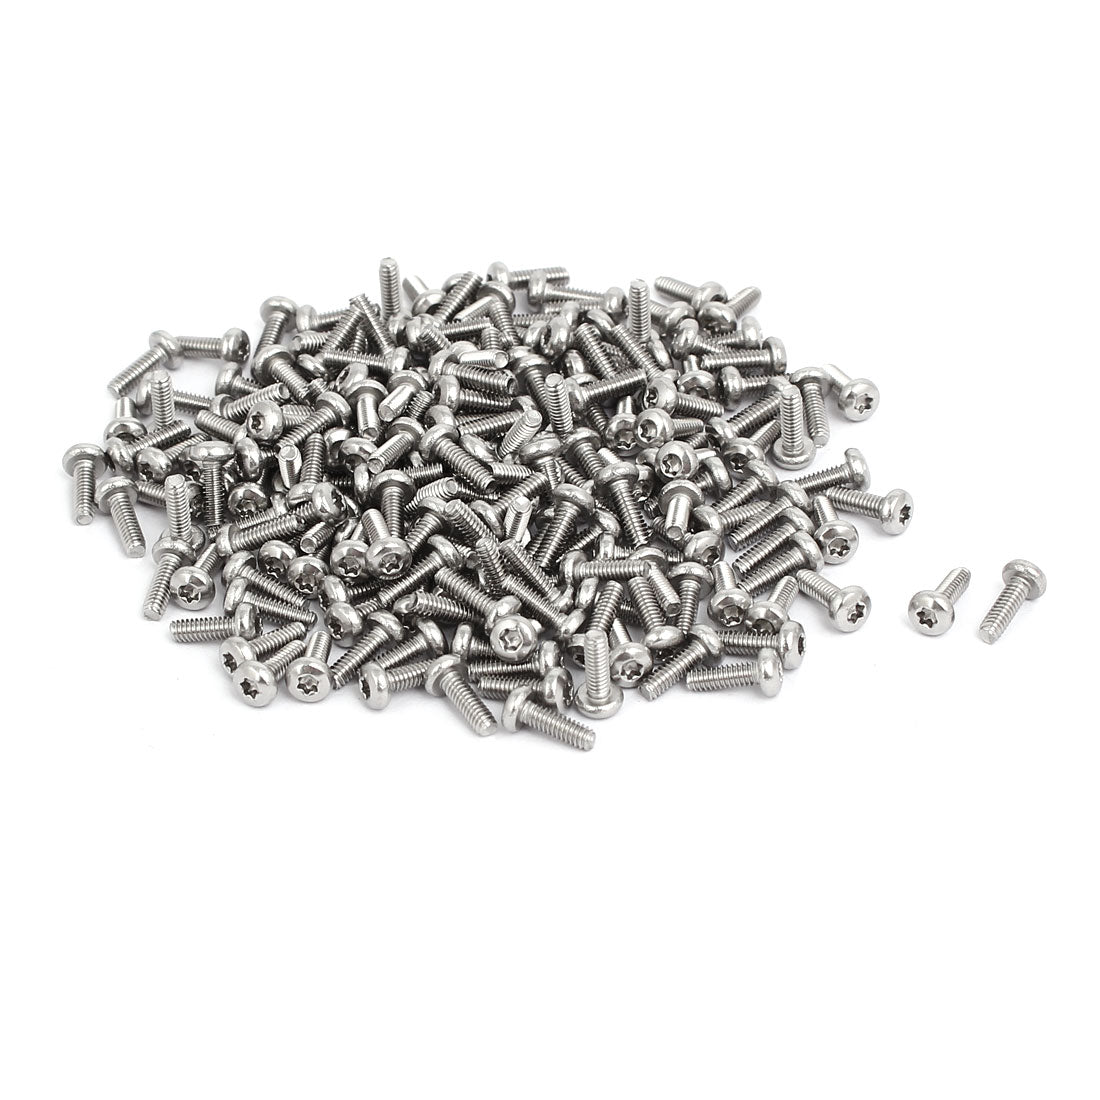 uxcell Uxcell M2x6mm 304 Stainless Steel Button Head Torx Screws Bolts T6 Drive 200pcs